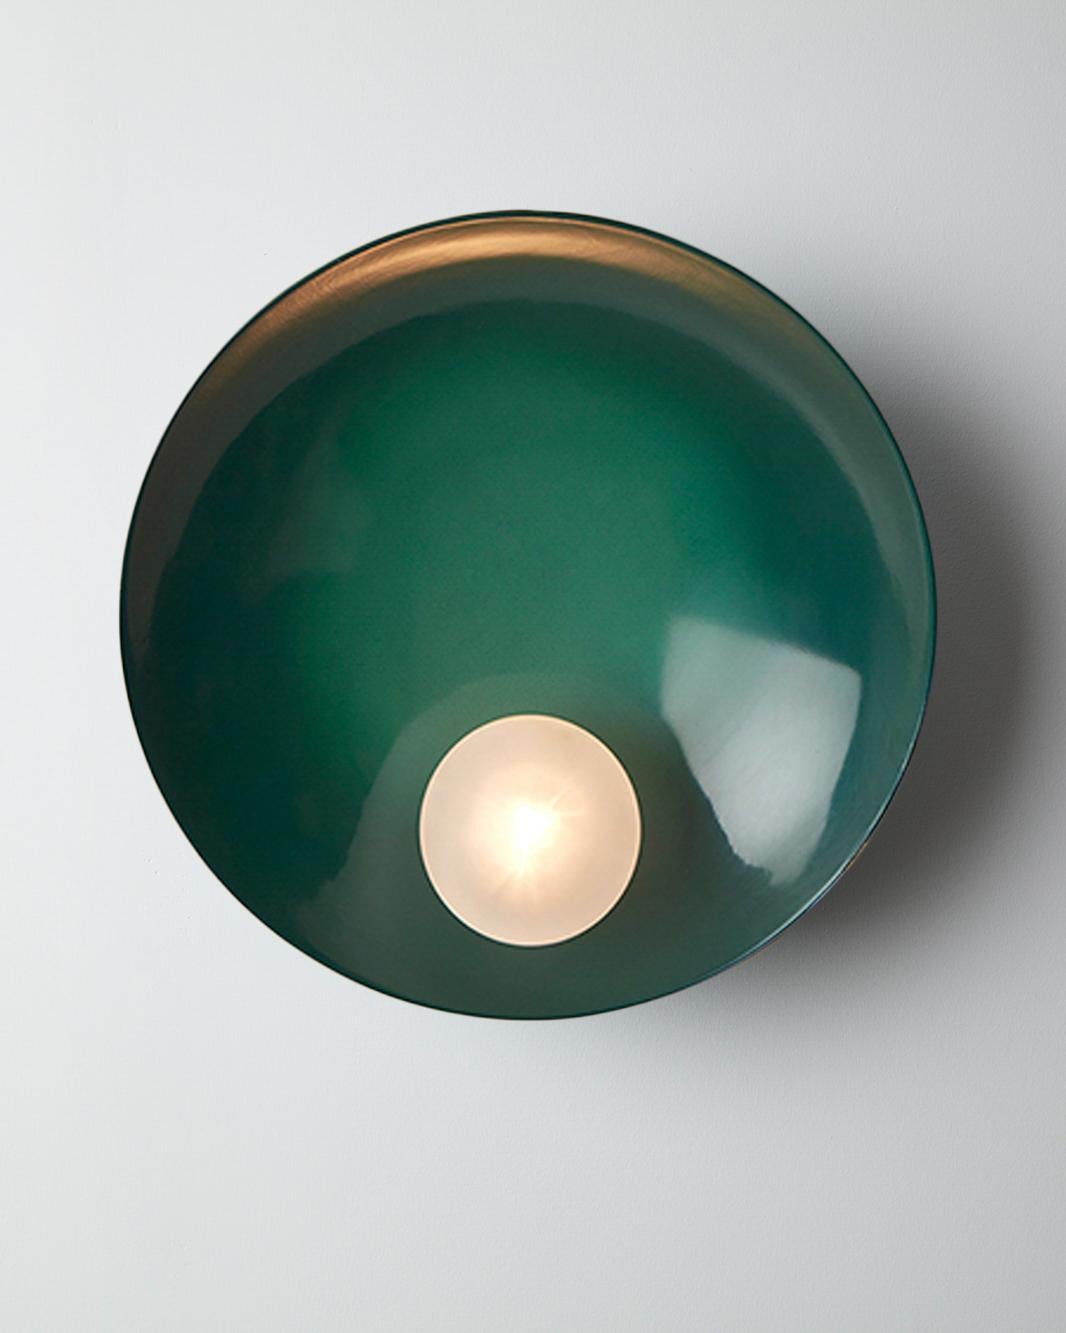 Oyster Emerald Green and Brushed Brass Ceiling Wall Mounted Lamp by Carla Baz
Dimensions: D 15 x W 40 x H 40 cm.
Materials: Brushed brass.
Weight: 3,5 kg.

Available in verdigris metal, brushed brass, copper or bronze finishes. Available in